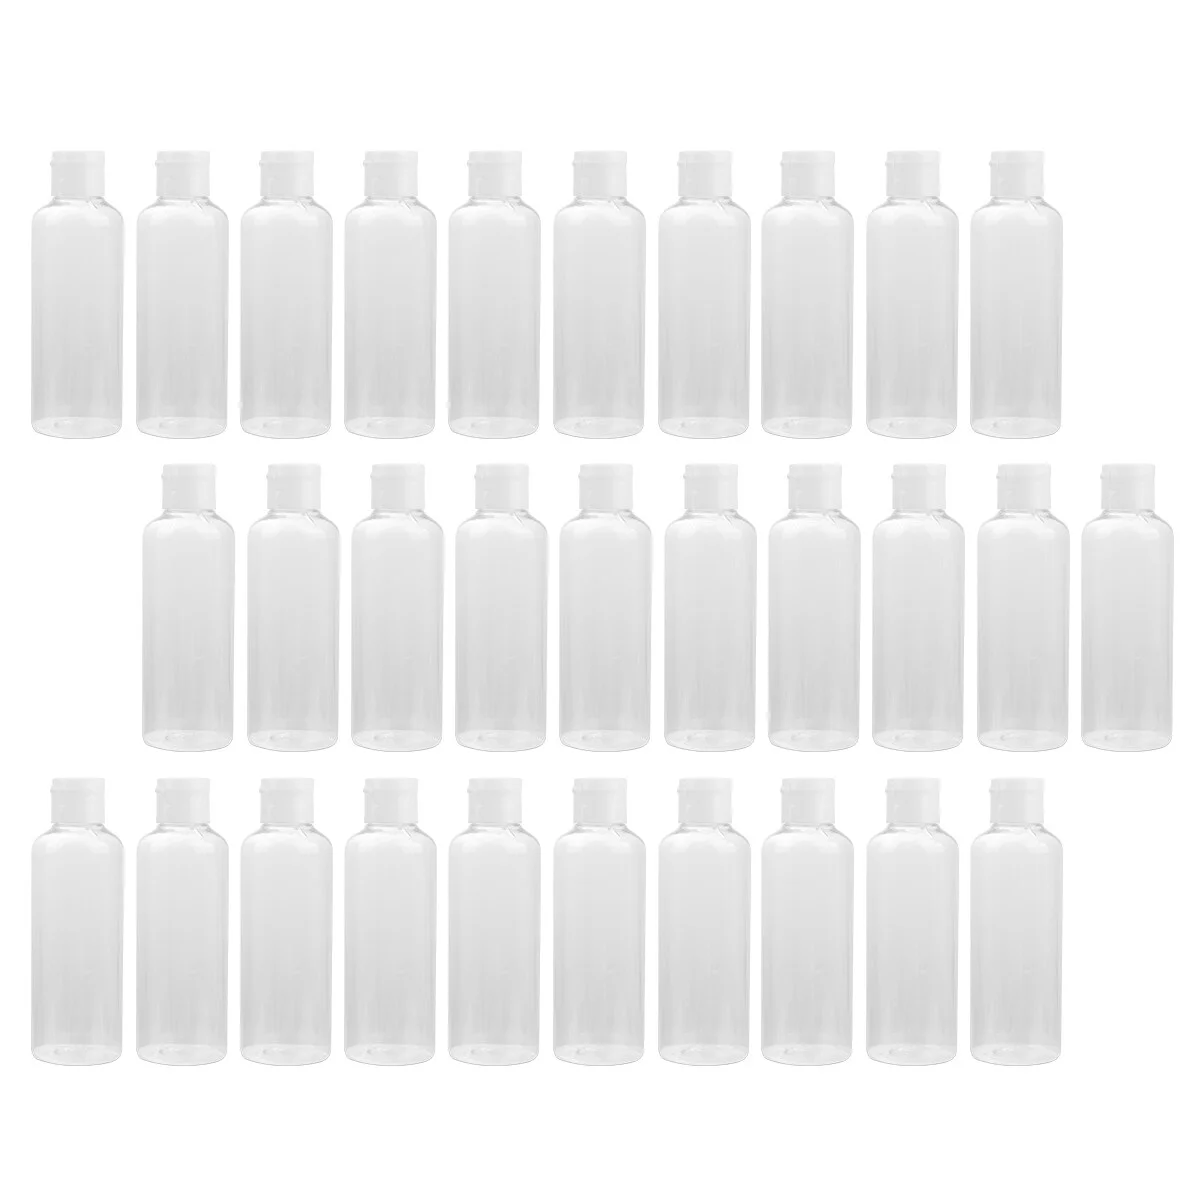 

30Pcs Clear Refillable Shampoo Bottle Portable Leakproof Empty Travel Container Holder Toiletries Supplies with Lid For Lotion